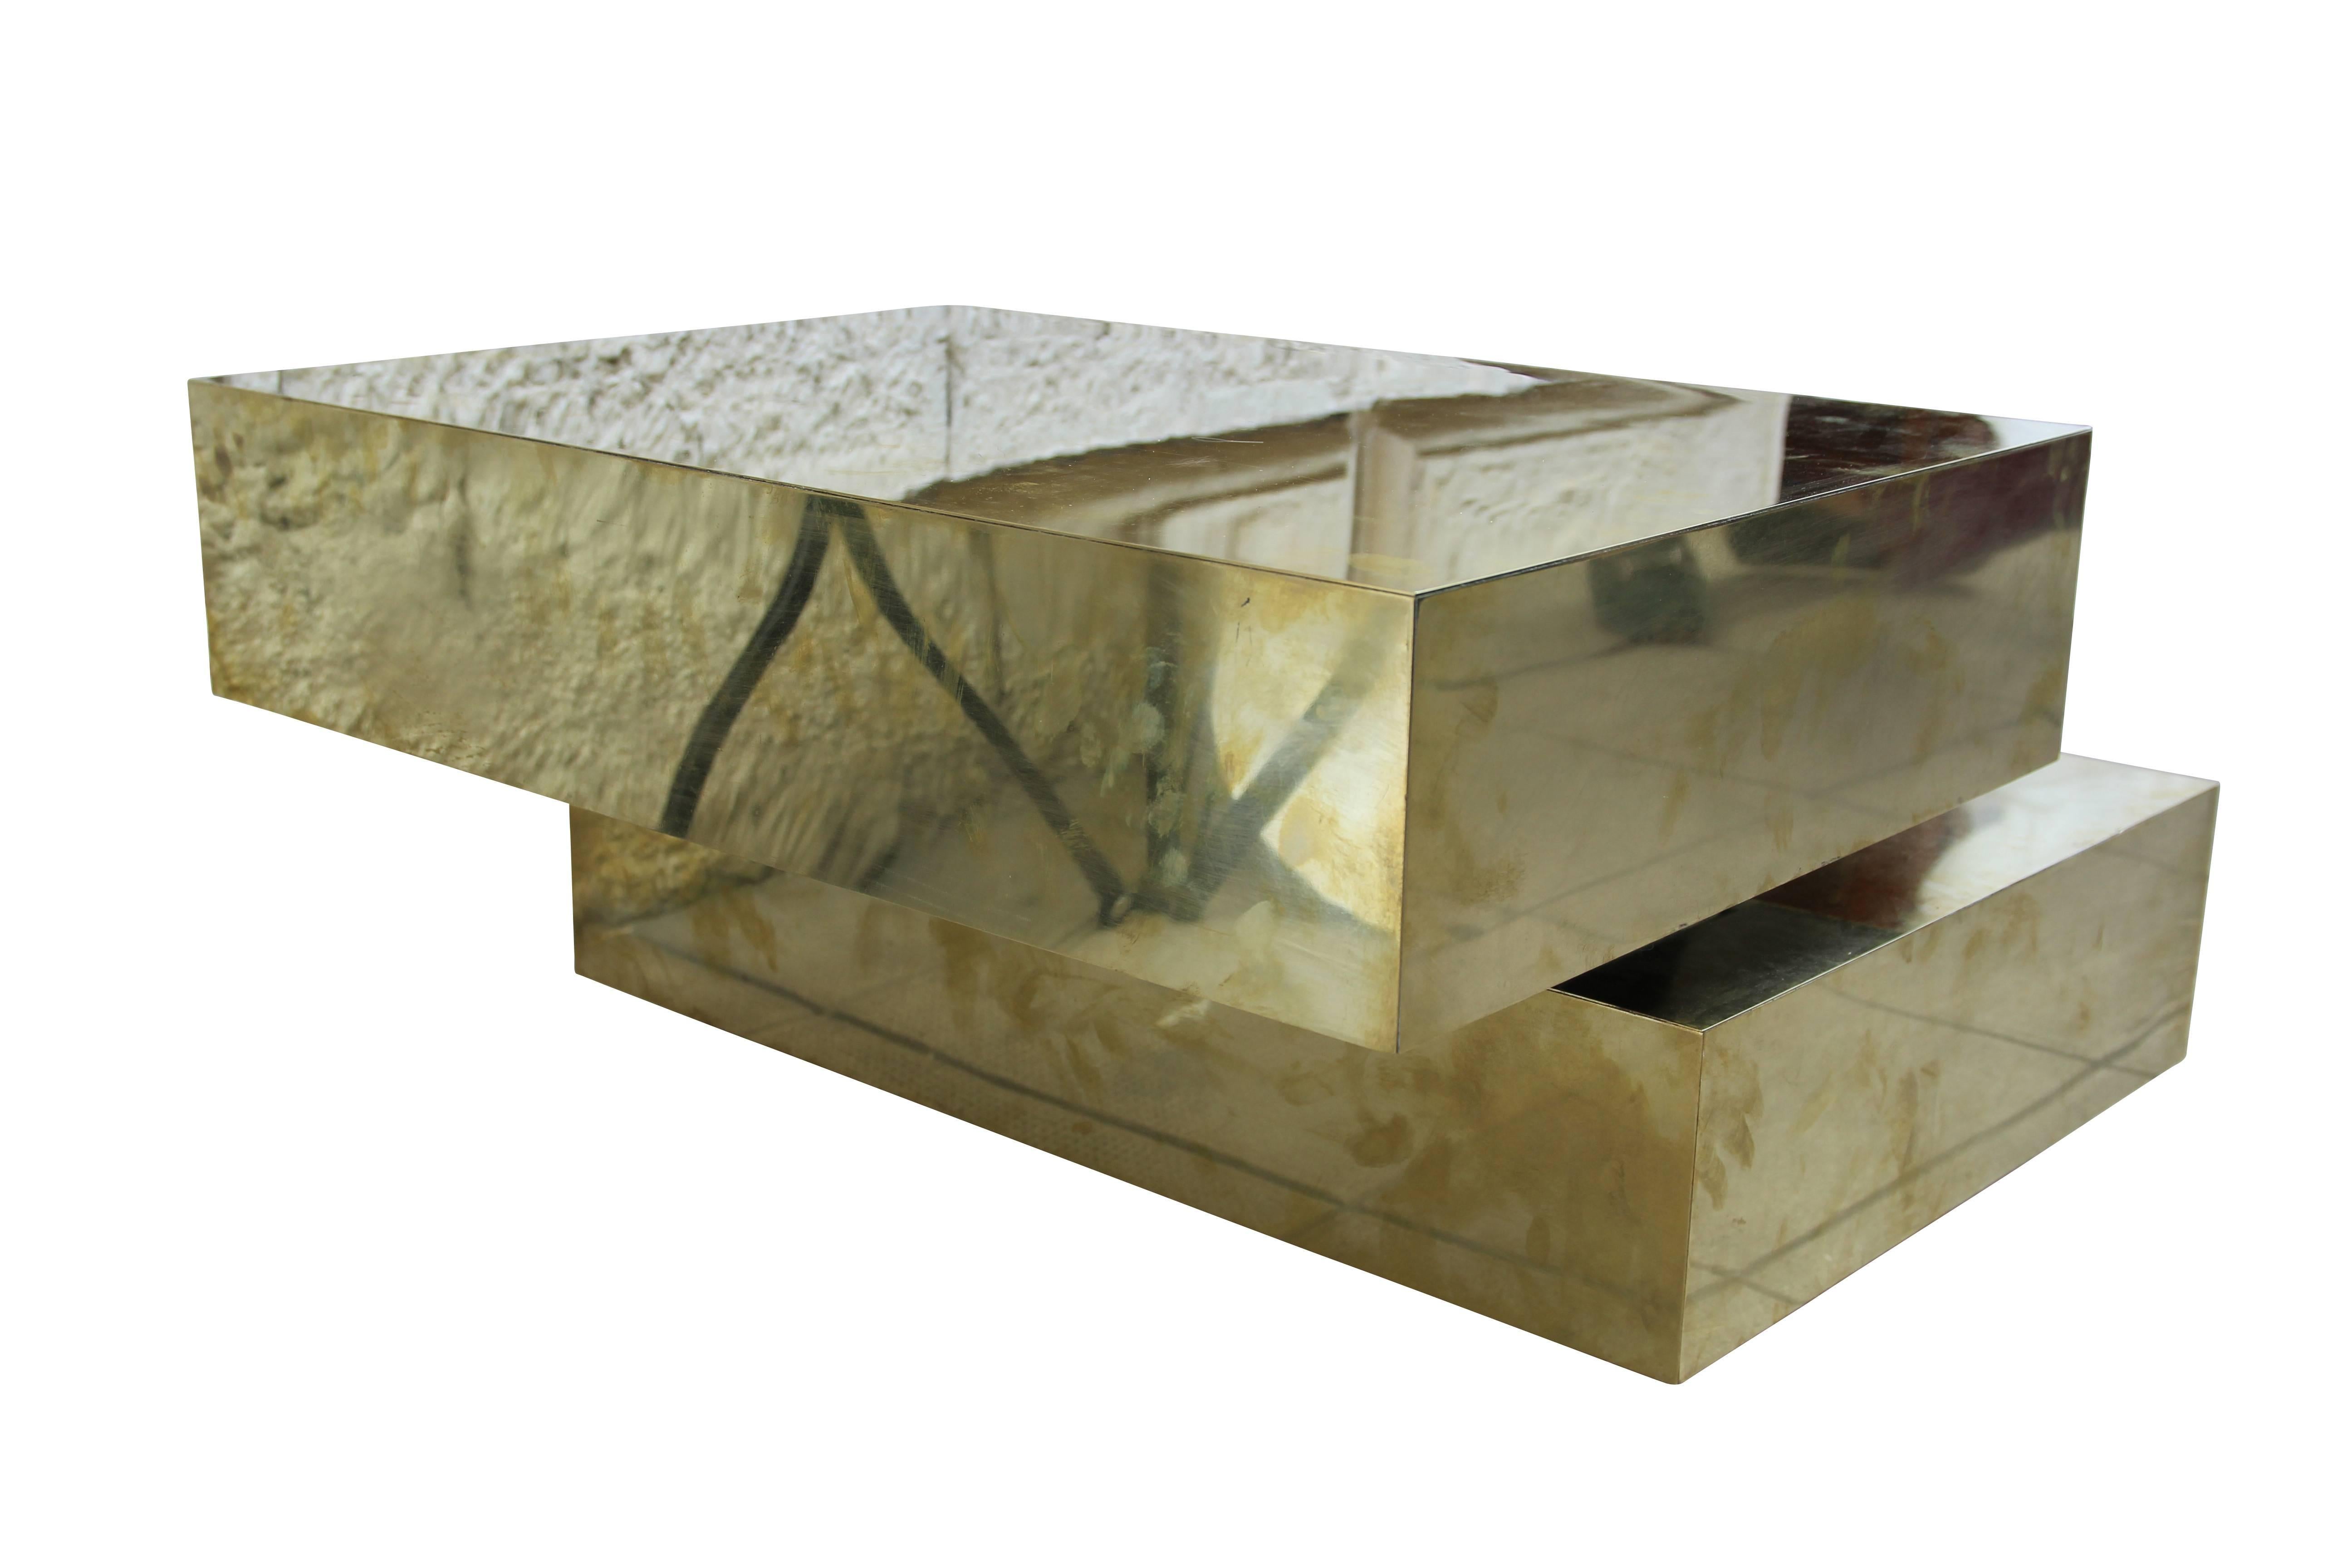 Coffee table by Gabriella Crespi, 
Sculpture Model,
Wooden structure covered with golden brass,
Mechanism metal which toggles the upper part,
Engraved signature, Italy, circa 1970.
Measures: Coffee table height: 40 cm. 
Cube height: 15 cm,